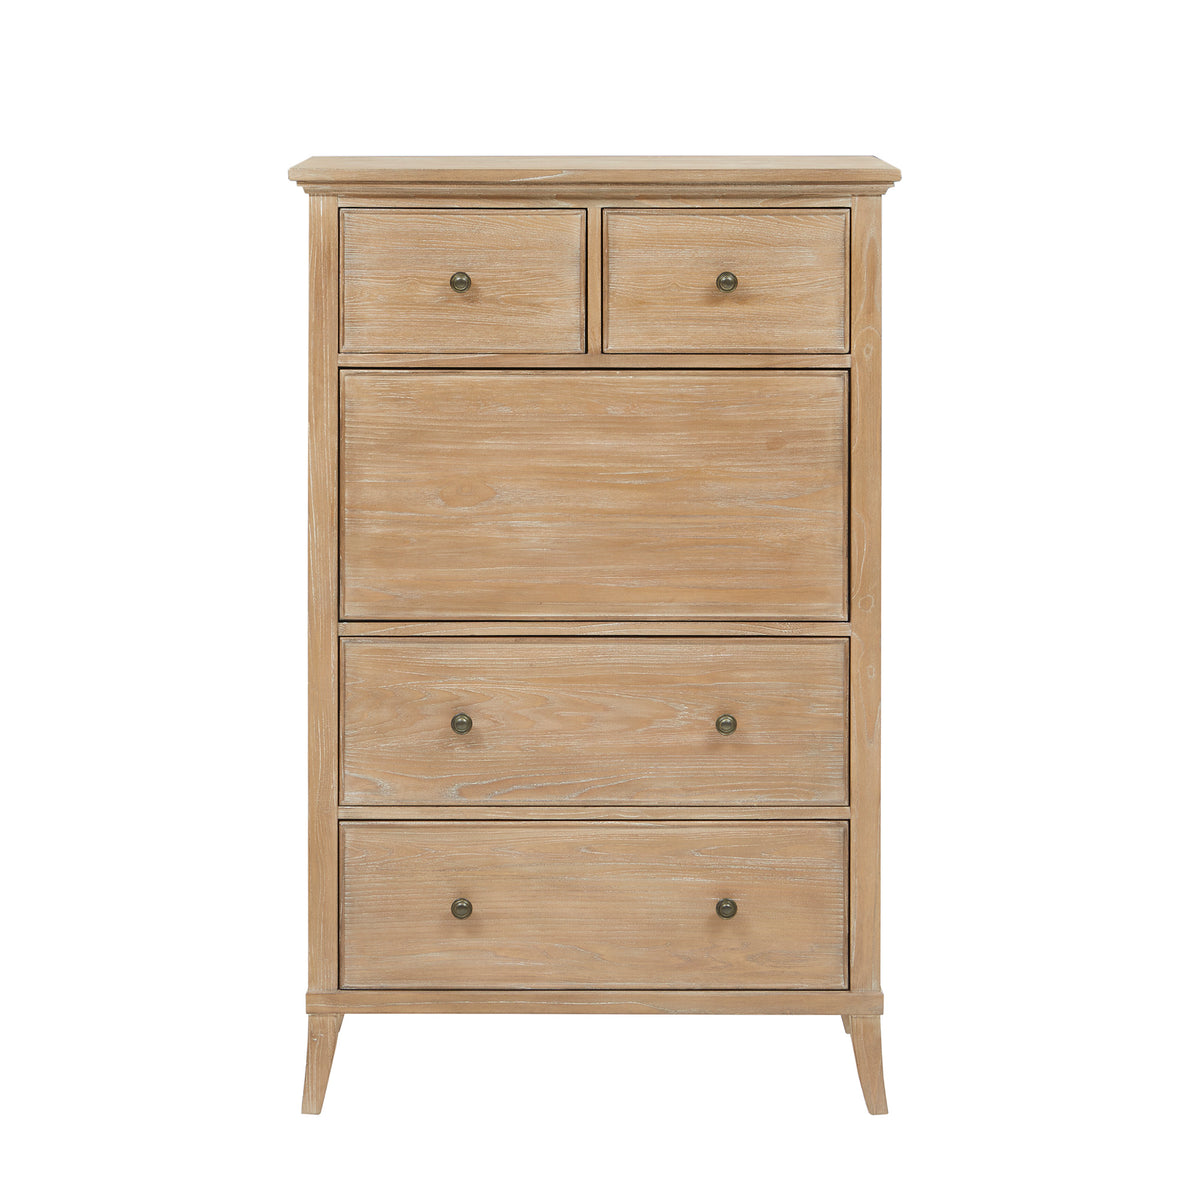 Cora Tallboy Unfolding Chest of Drawers - BUBULAND HOME